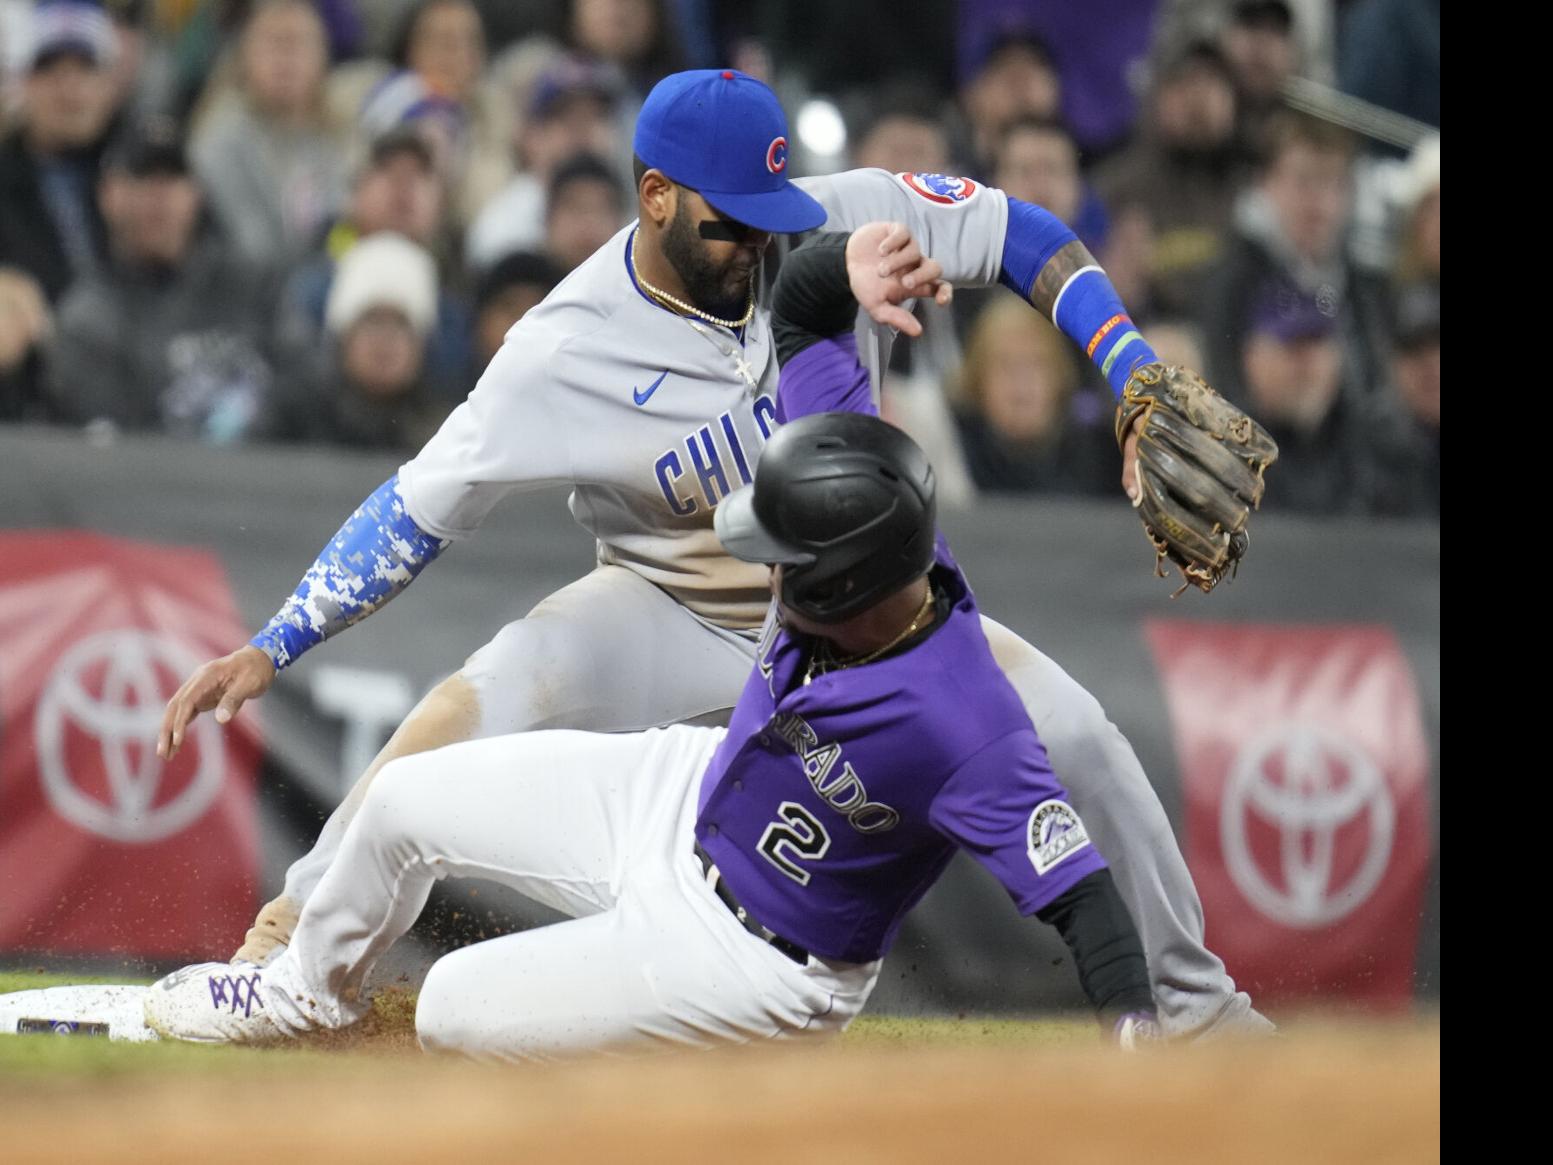 Randal Grichuk of the Colorado Rockies advances to third base in a